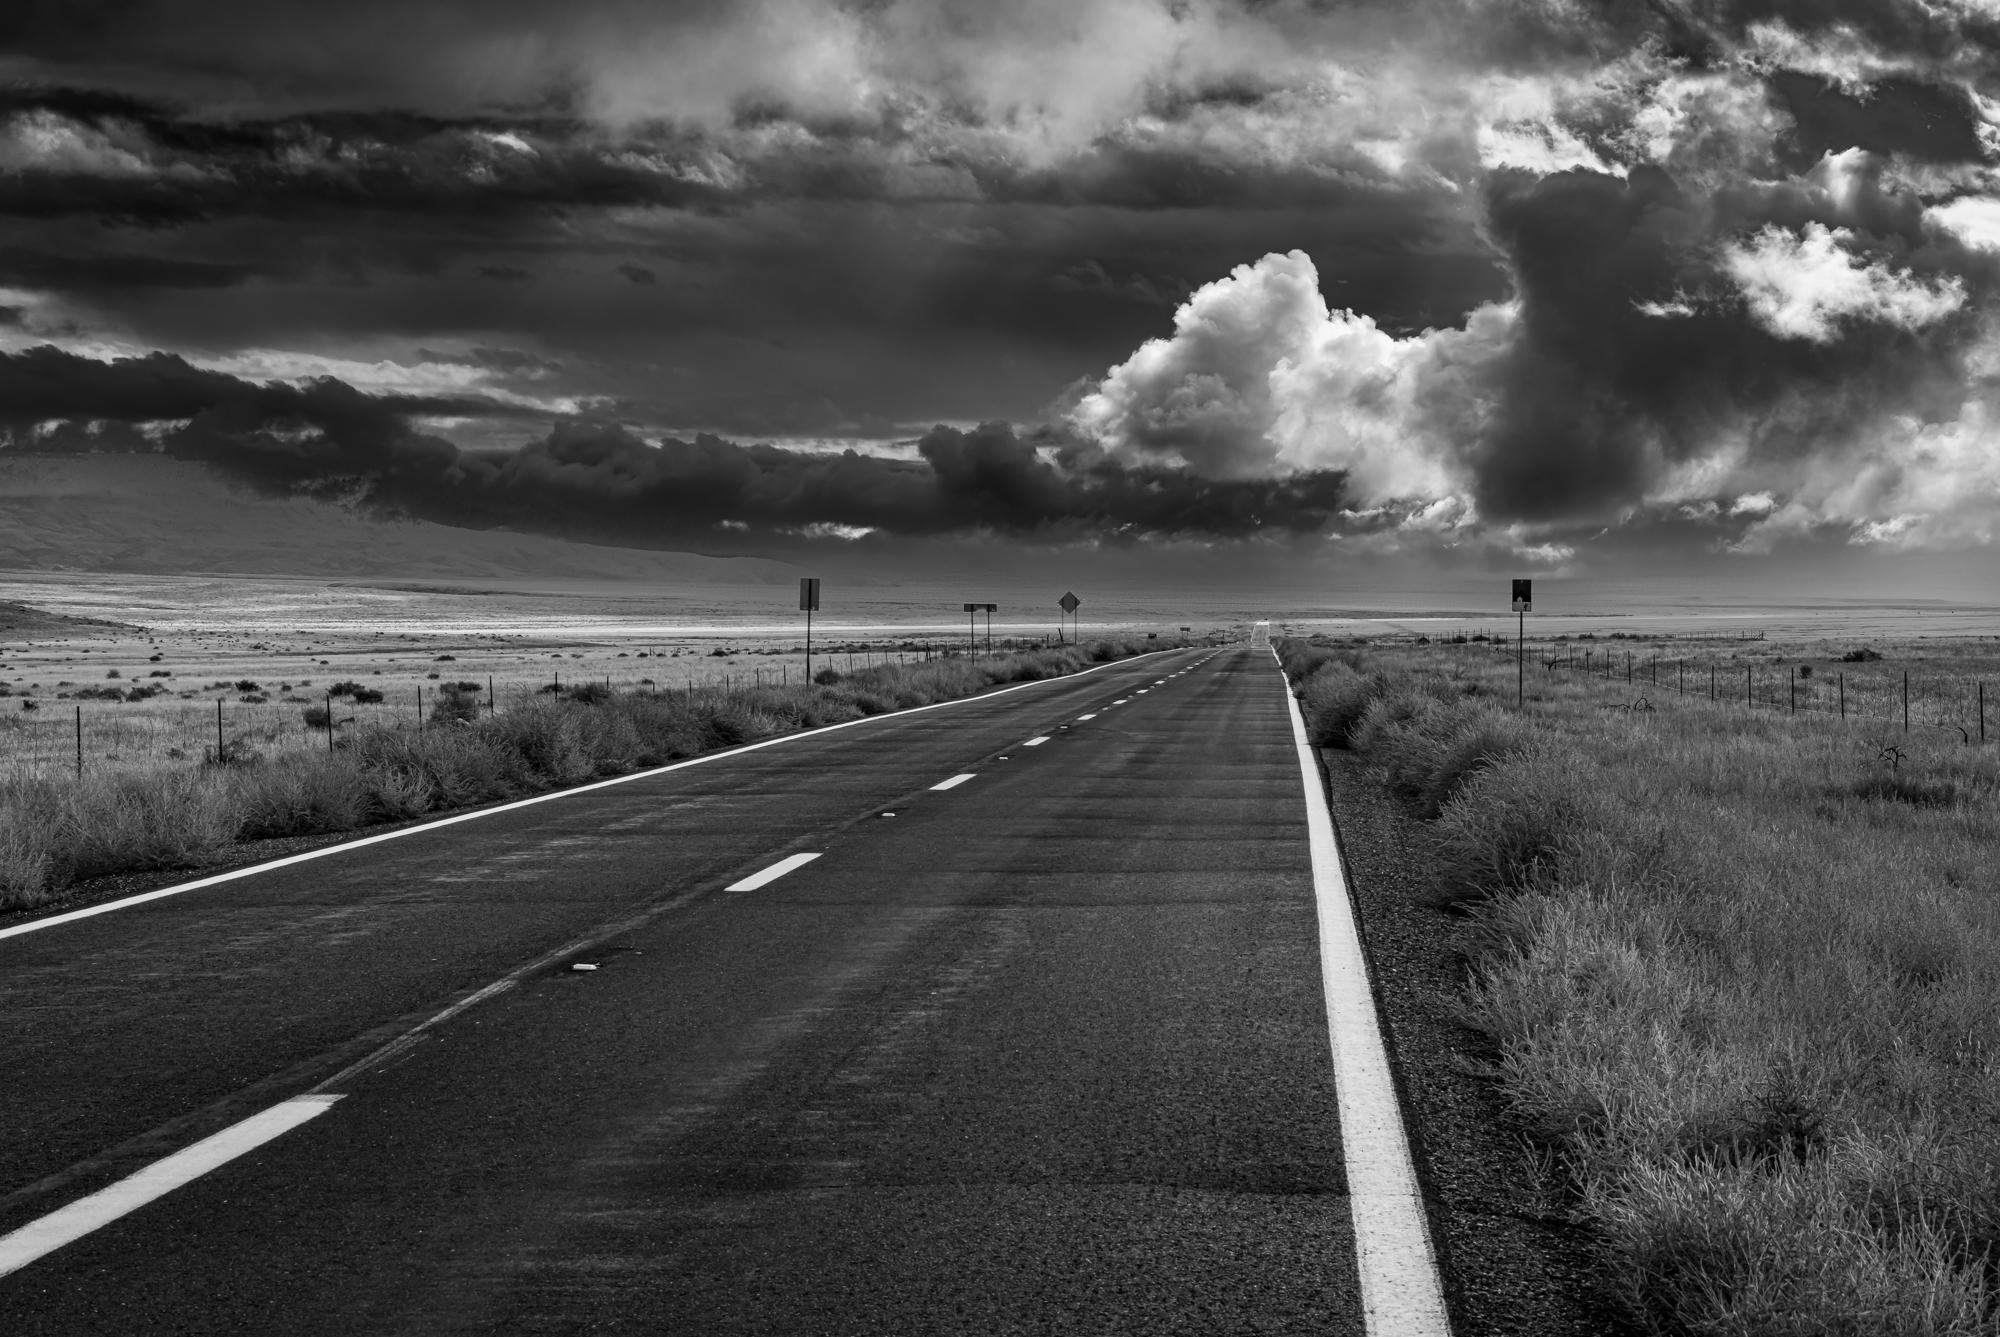 Howard Lewis Landscape Photograph -  Limited Edition Black and White Photograph - "Just The Road" , Utah 2018